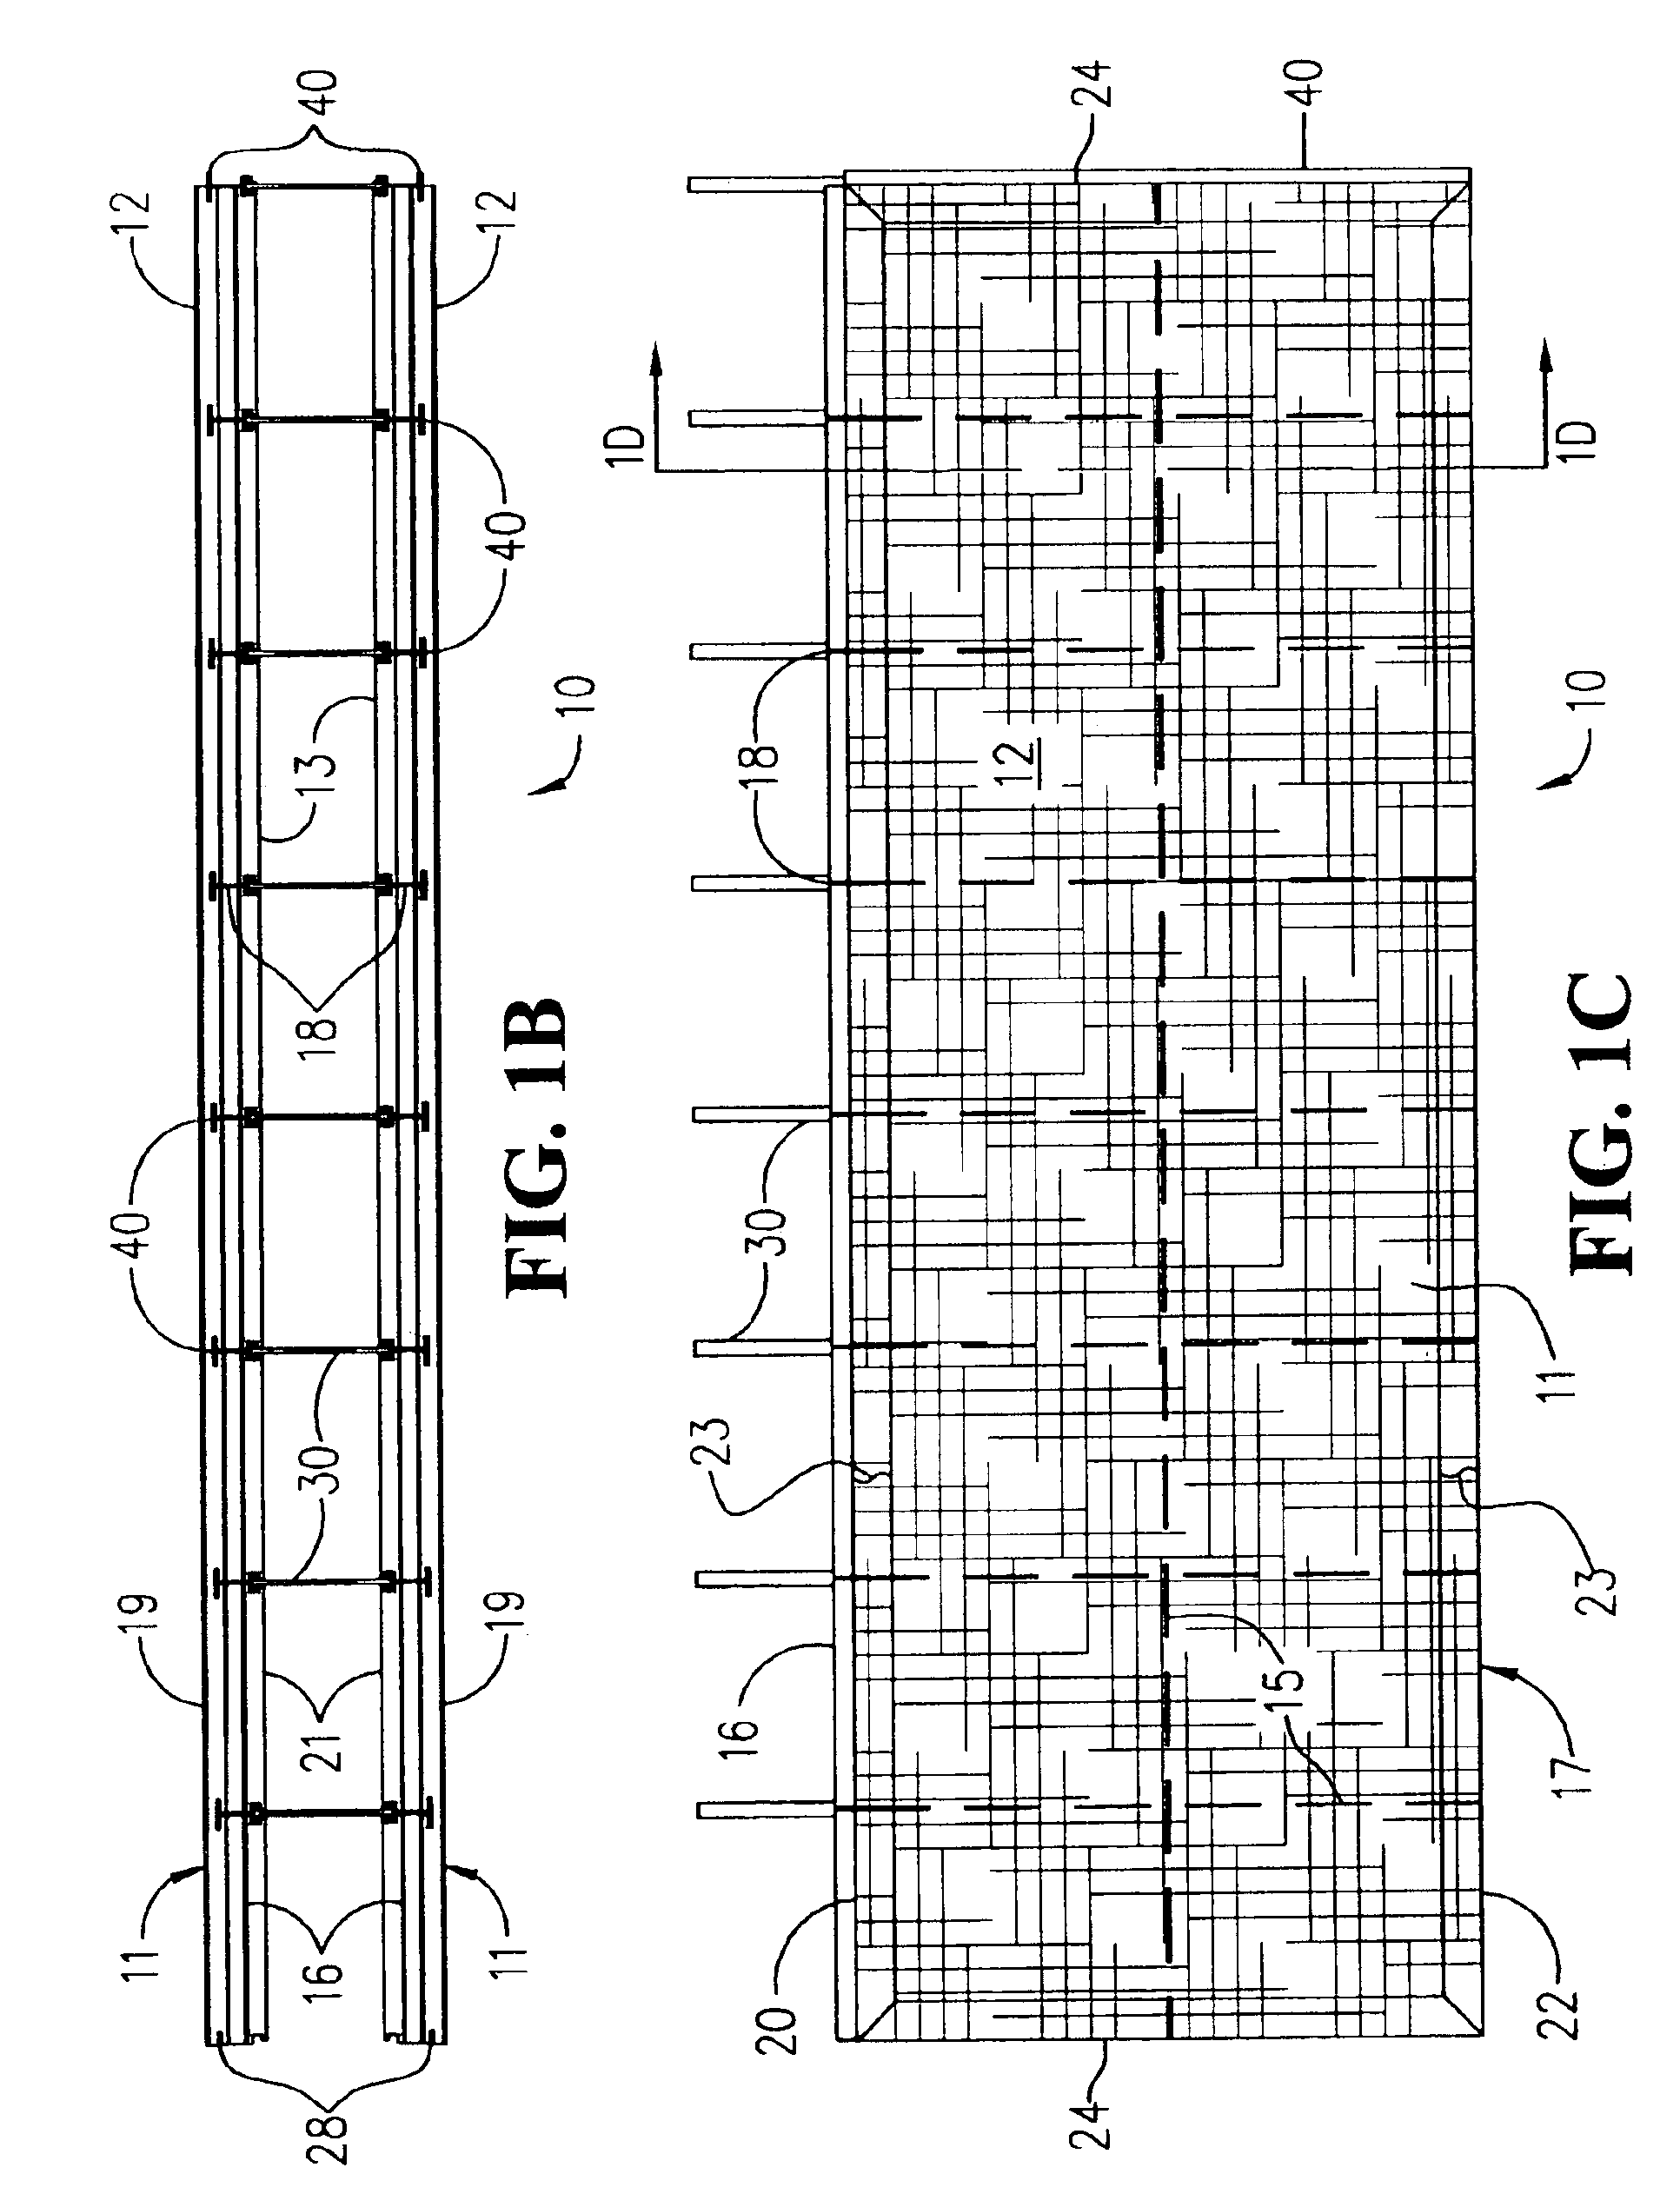 Reinforced composite system for constructing insulated concrete structures